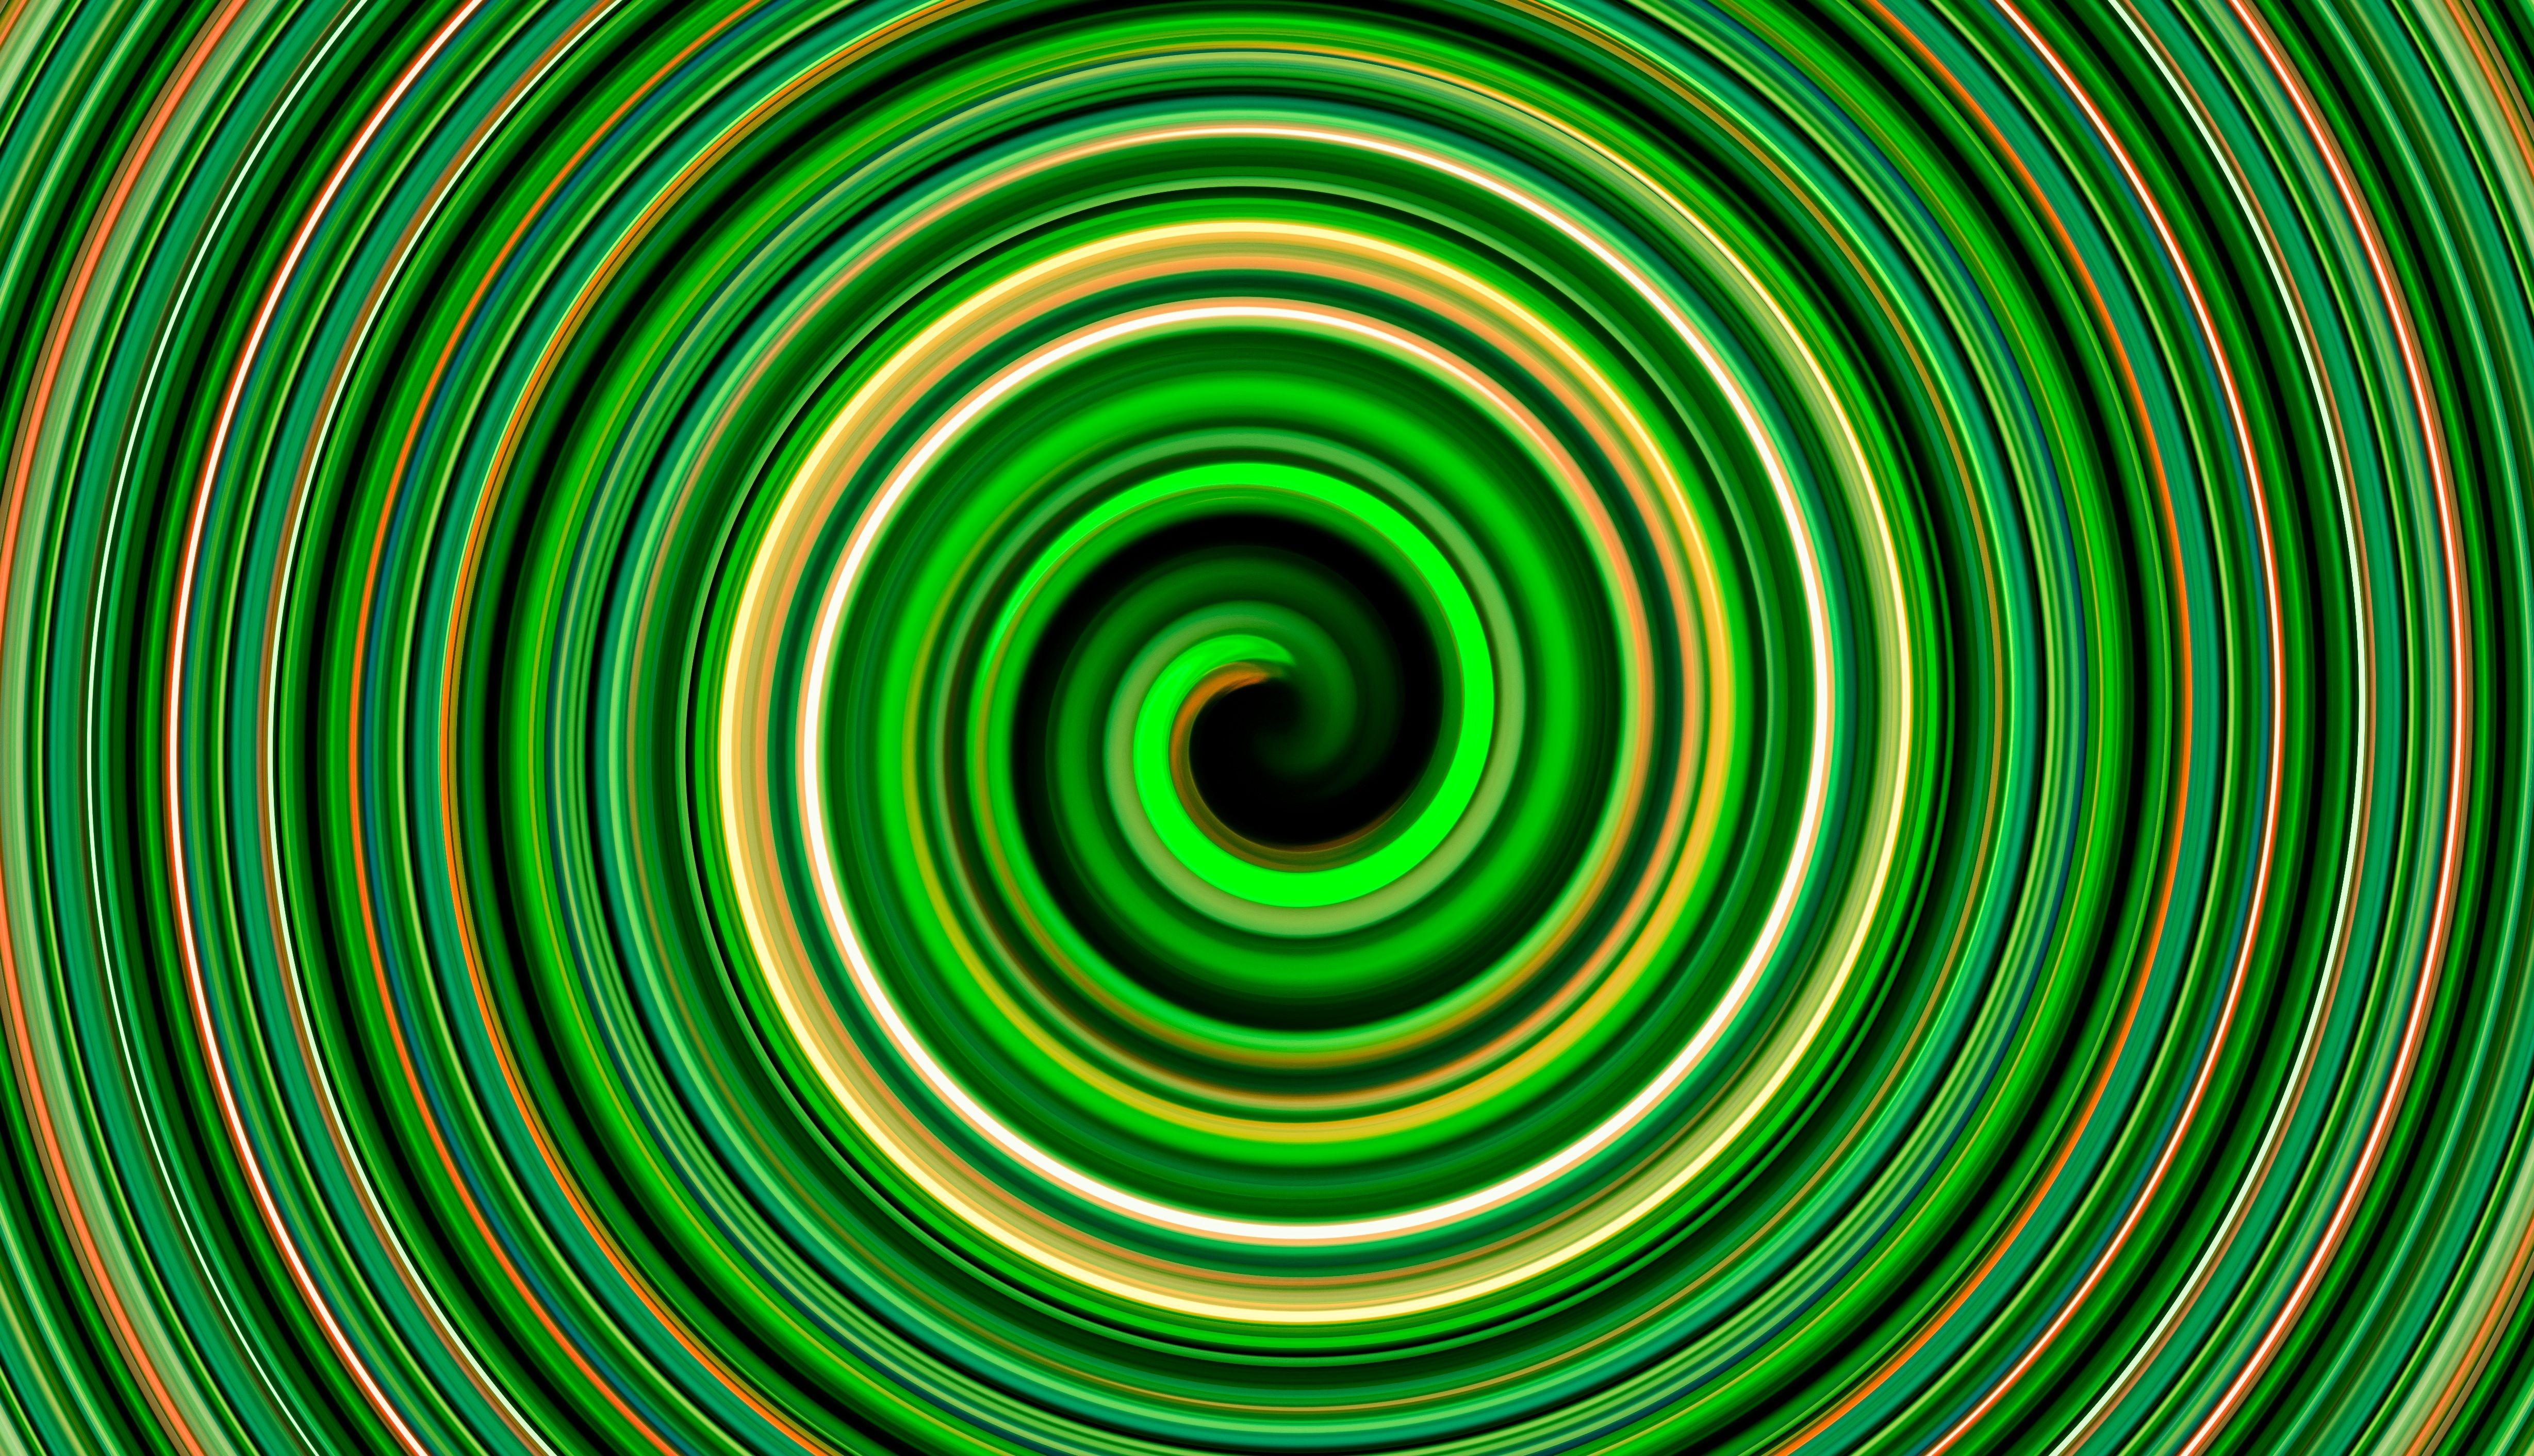 Yellow and Black Swirl Logo - Background with green, yellow and black swirl free image